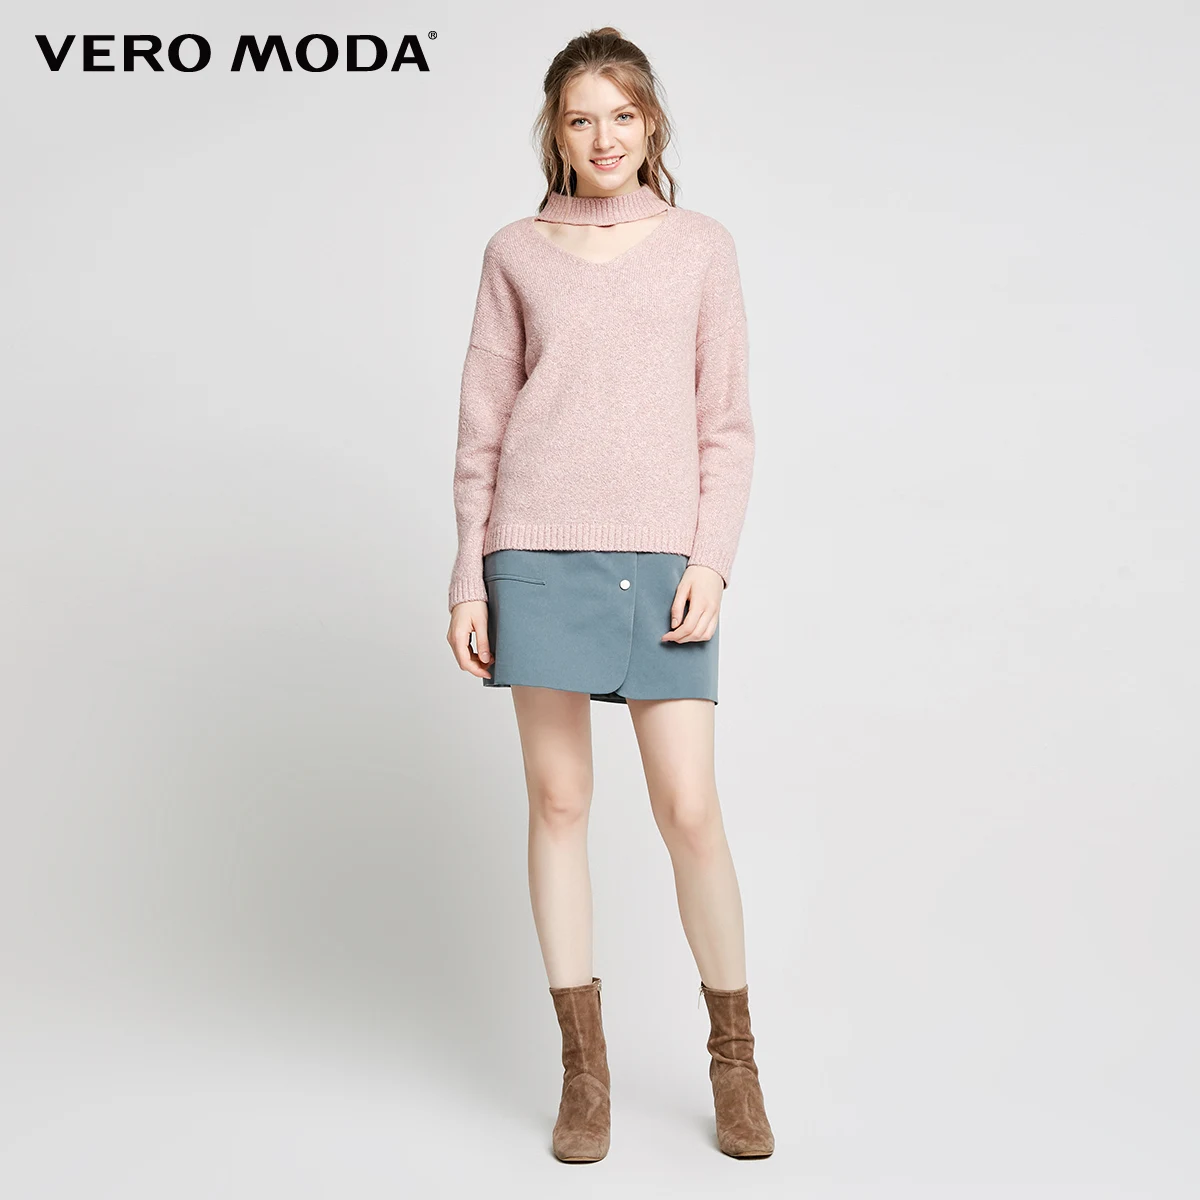 Vero Moda Brand NEW simple commuting solid color open collar design dropped shoulder pullover knit women |318113520 | Женская одежда